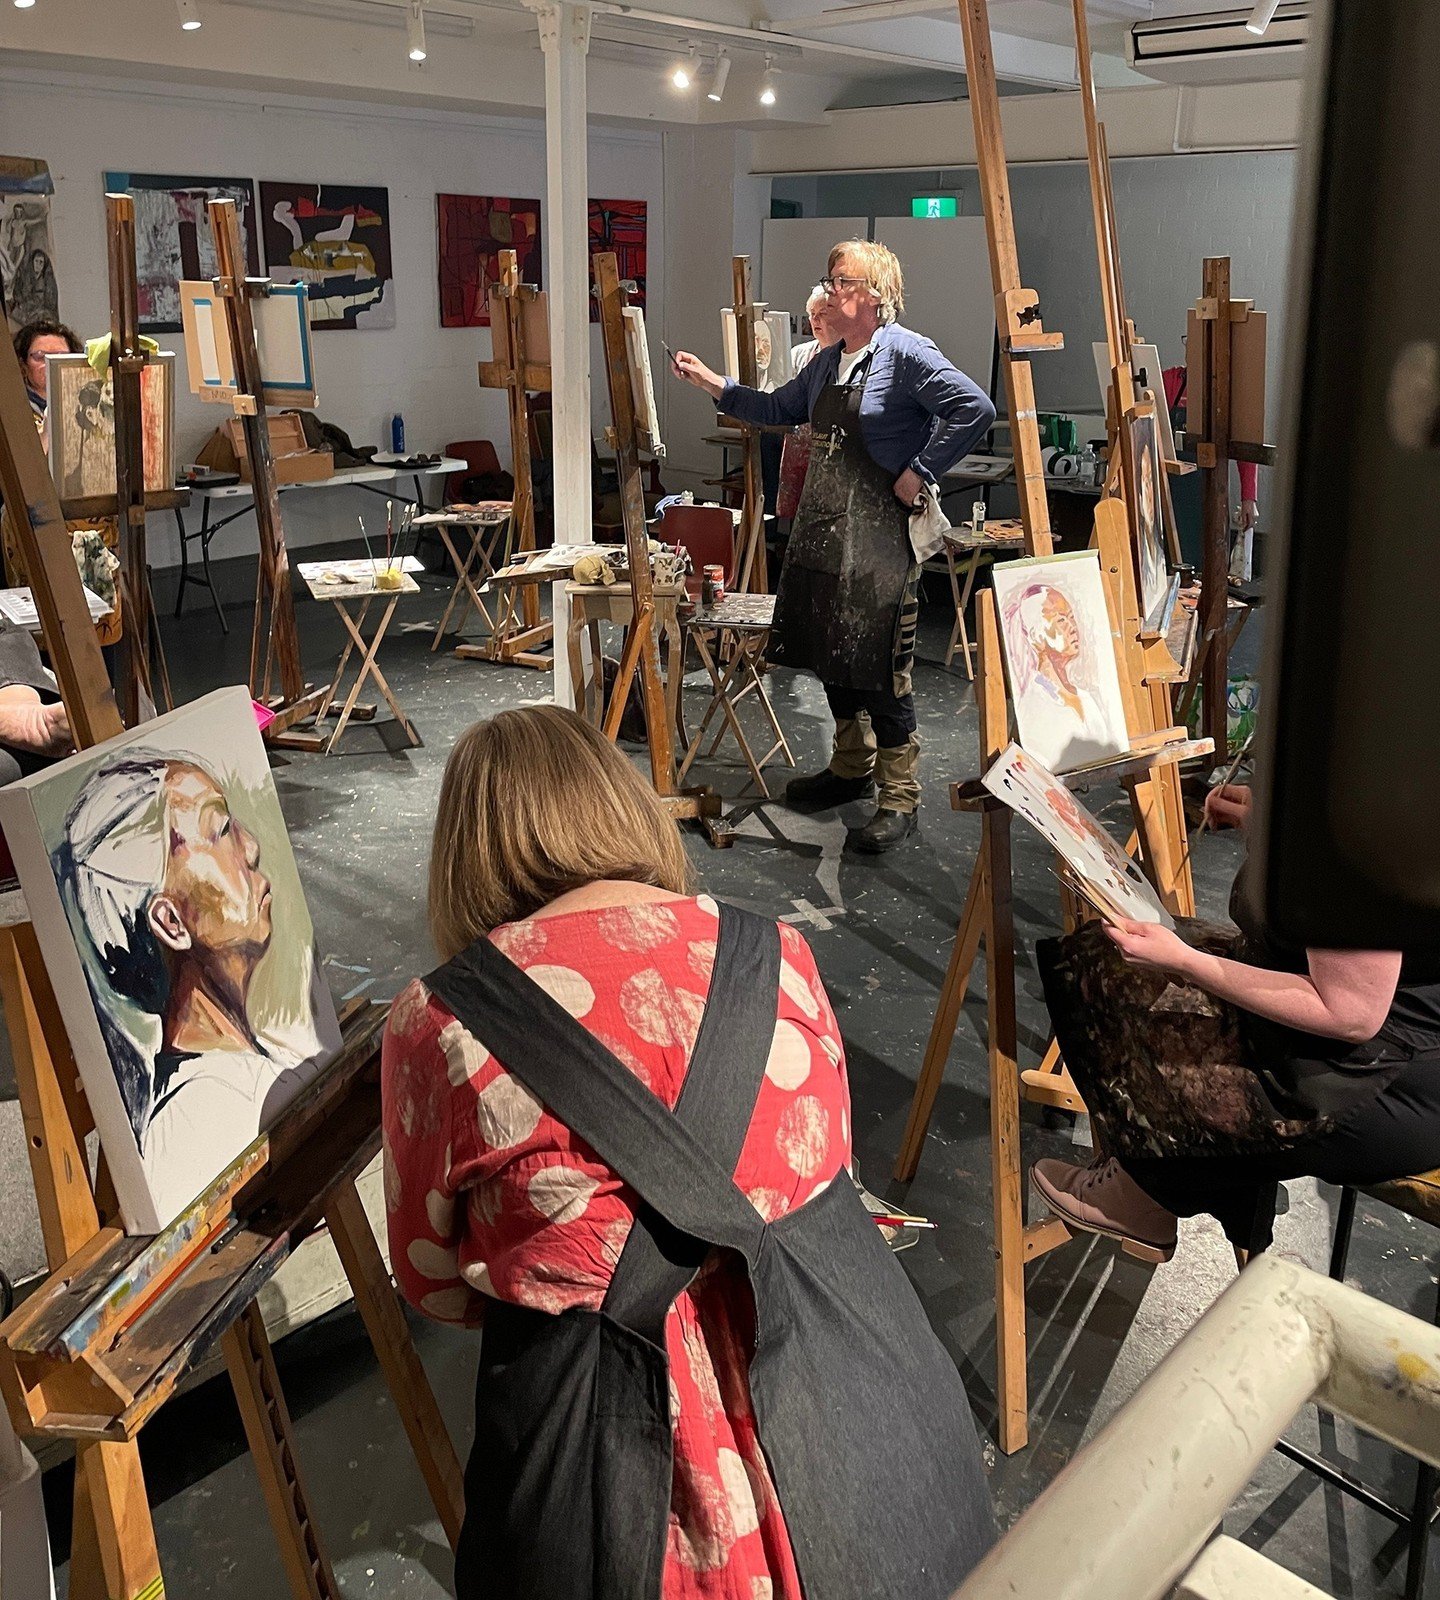 More work to be done. Day two of our Lewis Miller portrait painting workshop today.⁠
⁠
⁠
⁠
⁠
#hawthornartistsociety #artclass #has_art #fromlife #figuredrawing #drawingclass #melbourneart #melbourneartist  #lifedrawing #drawing #artoninstagram #drawi